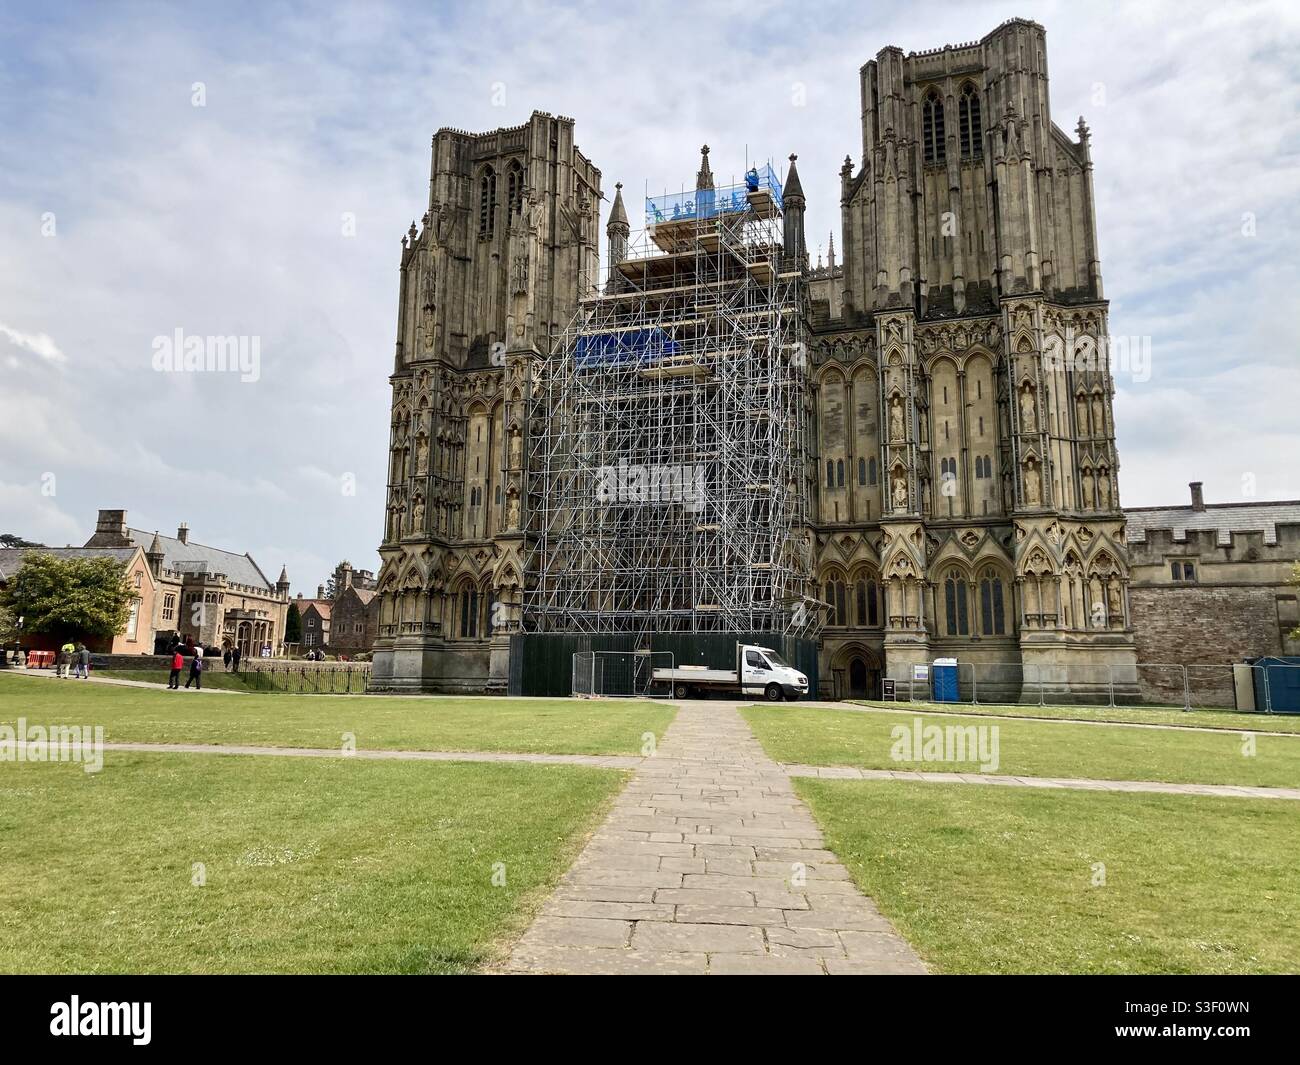 Scaffolding erected at the front of Wells Cathedral, Wells, Somerset, England, UK, Europe undergoing restoration and repair works to the historic monument Stock Photo